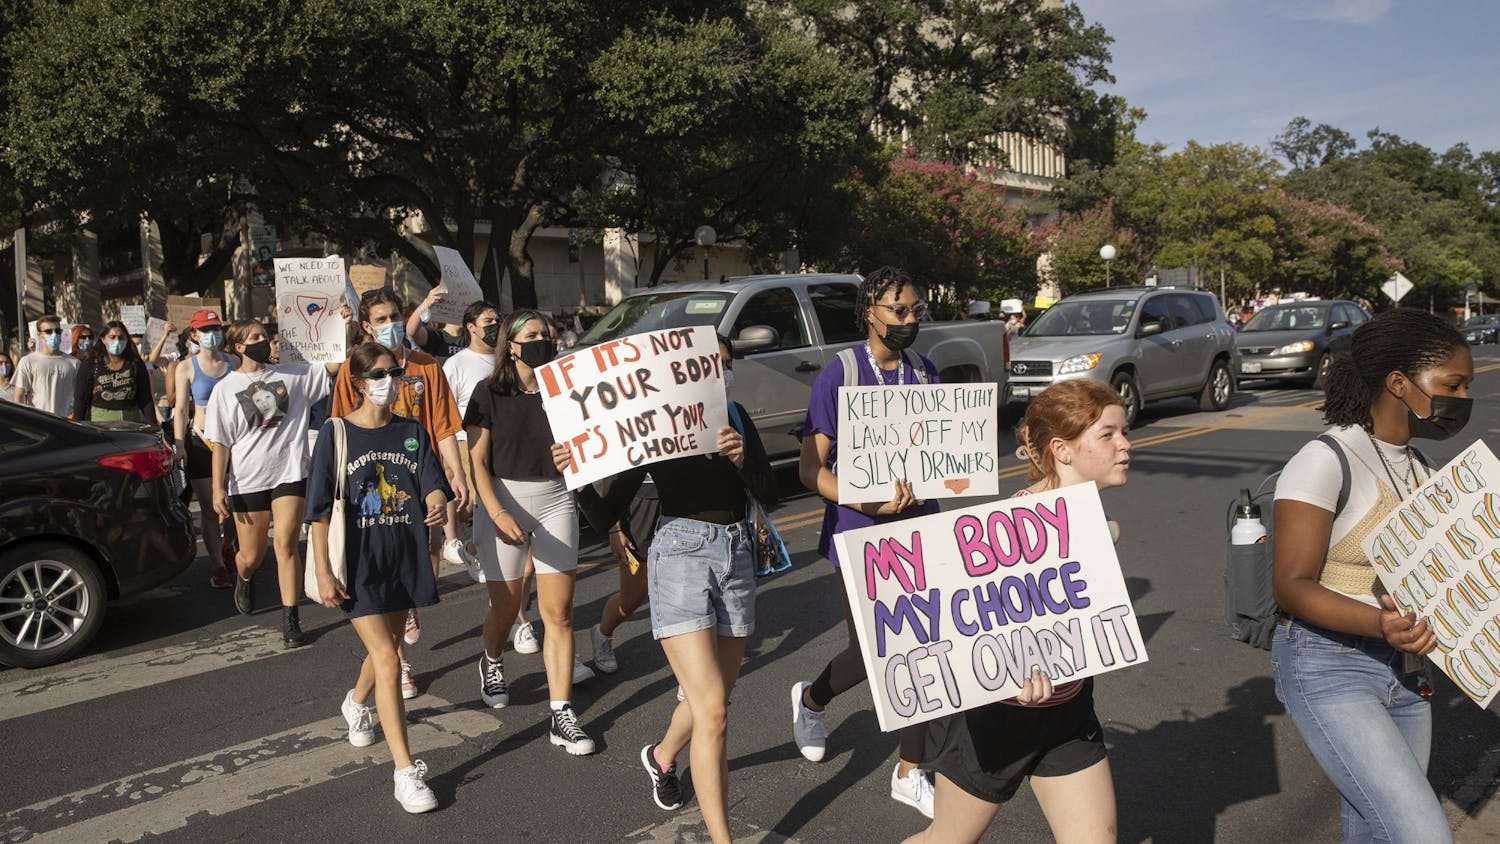 University of Texas students march from the UT campus to the state Capitol on Sept. 7, to protest the state law banning abortions after six weeks. Photo courtesy of Jay Janner/Austin American-Statesman/TNS.